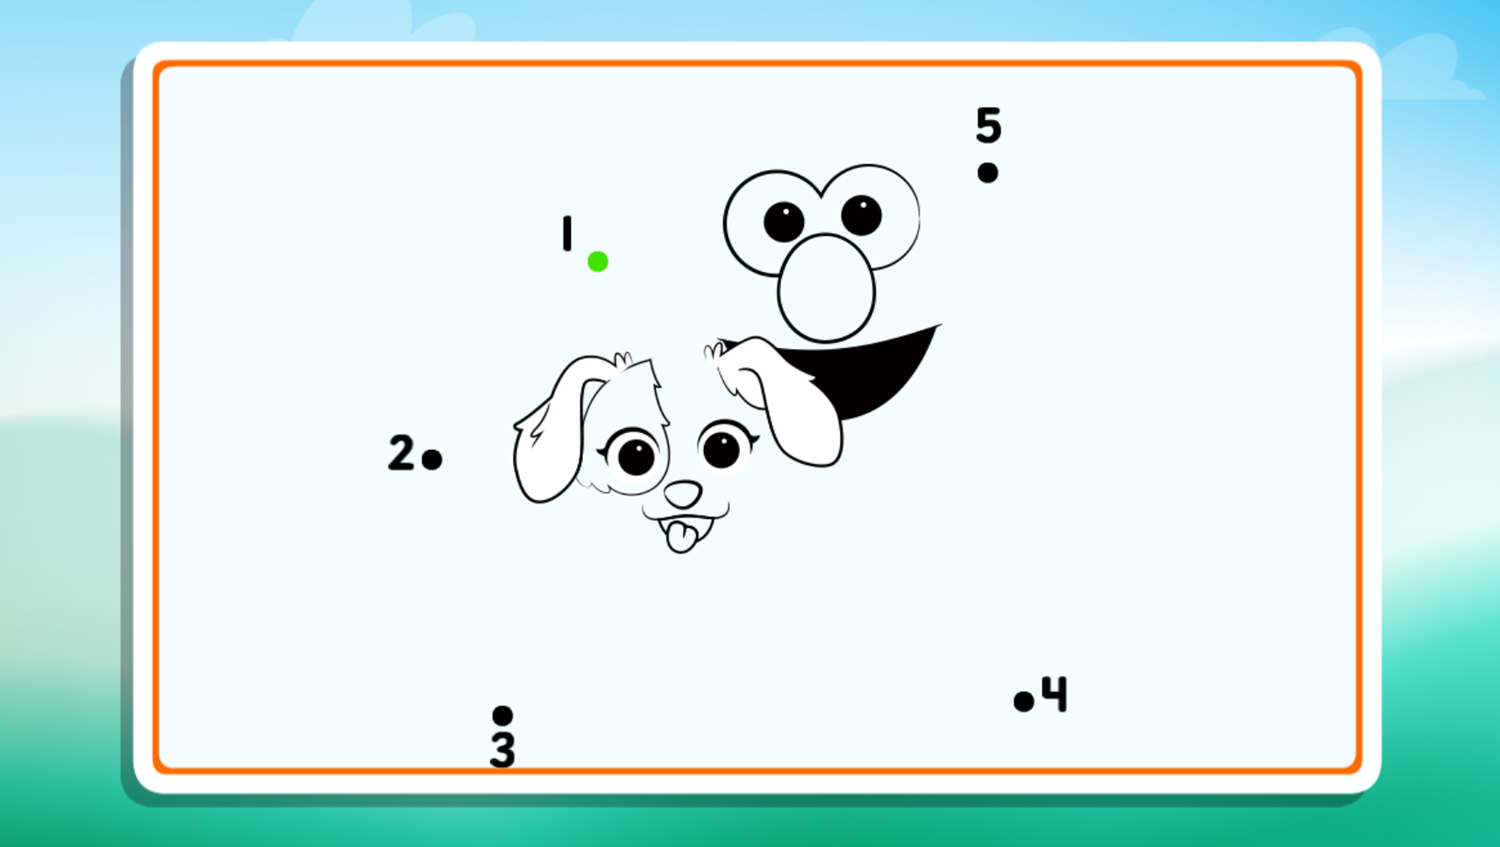 Sesame Street Furry Friends Forever Connect the Dots Game Level Start Screenshot.